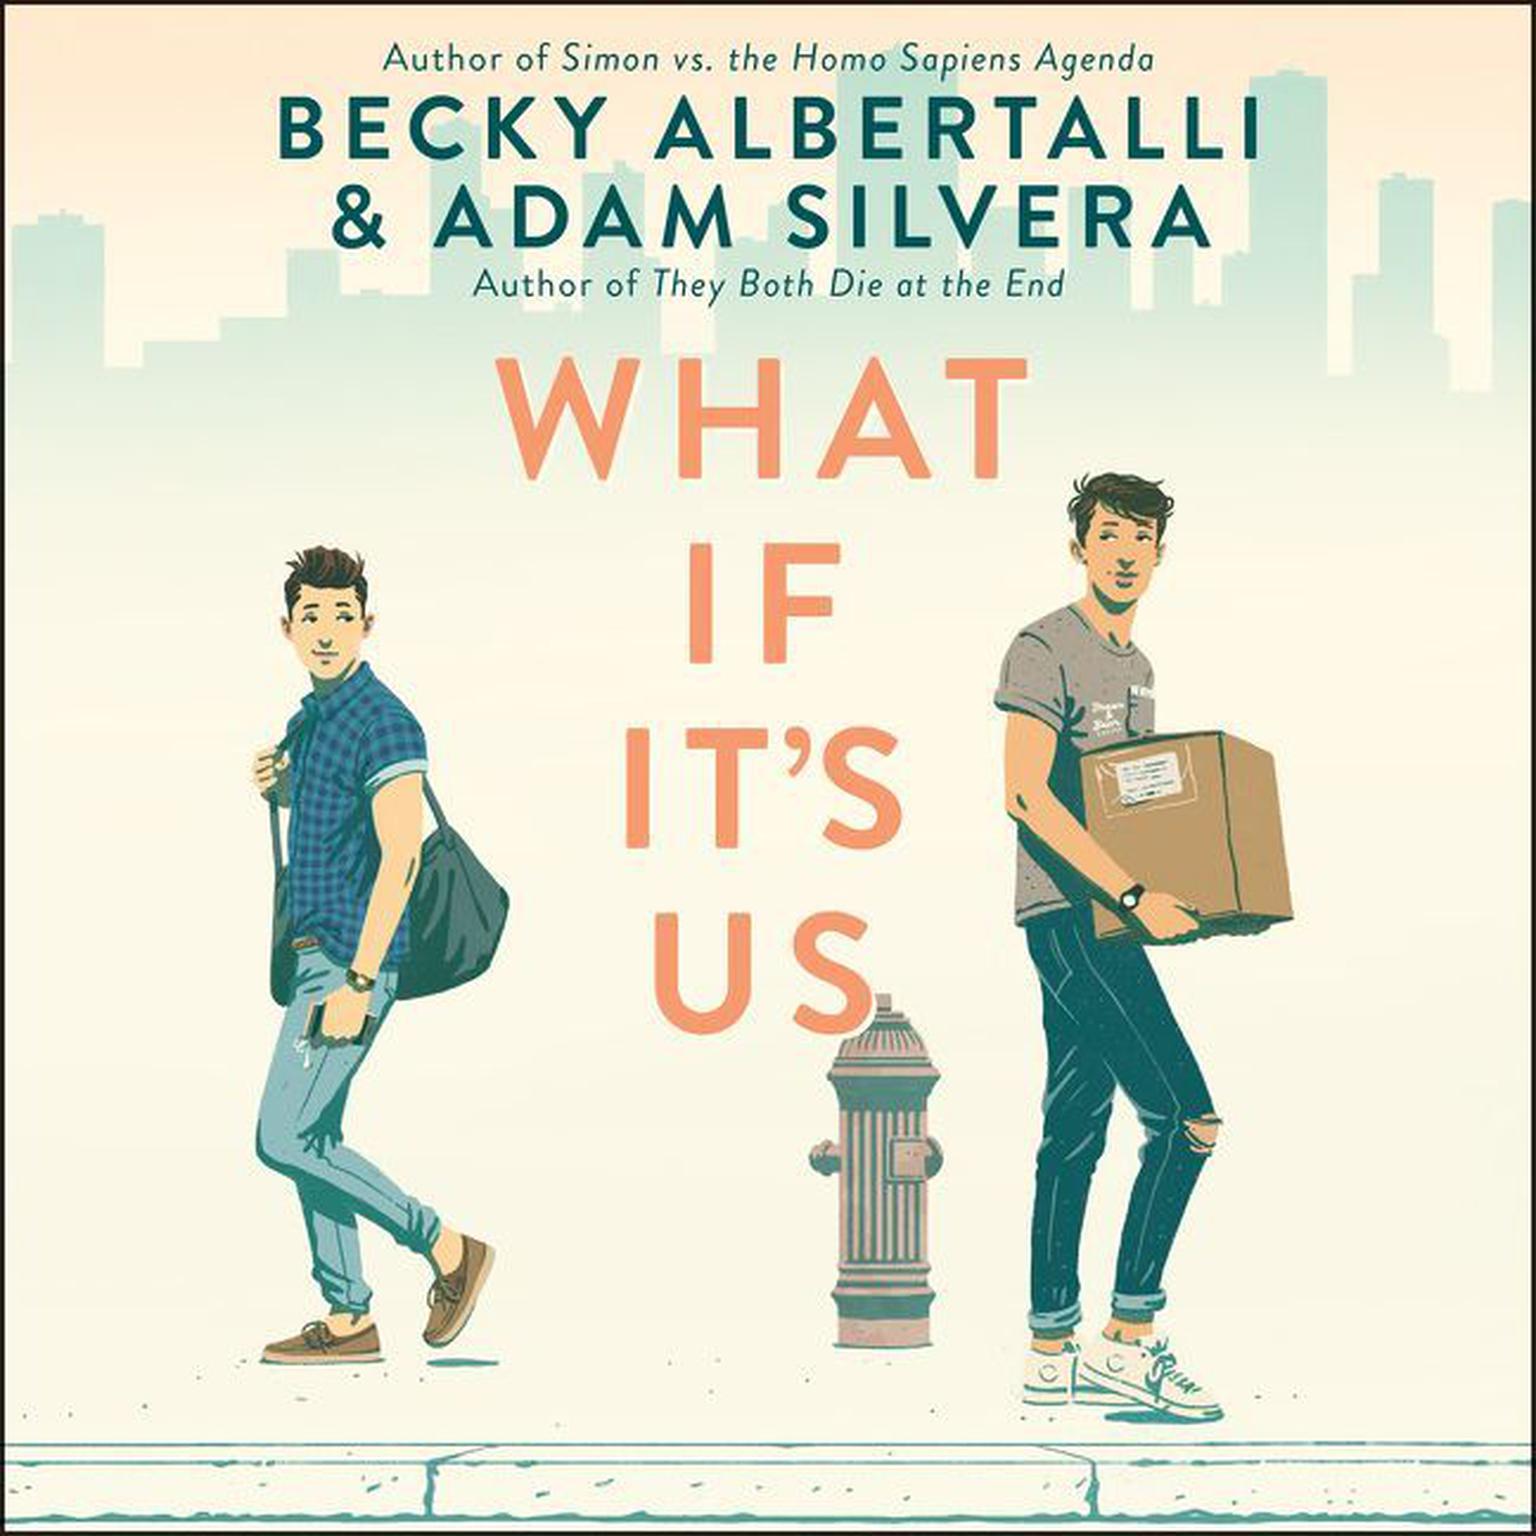 What If Its Us Audiobook, by Becky Albertalli